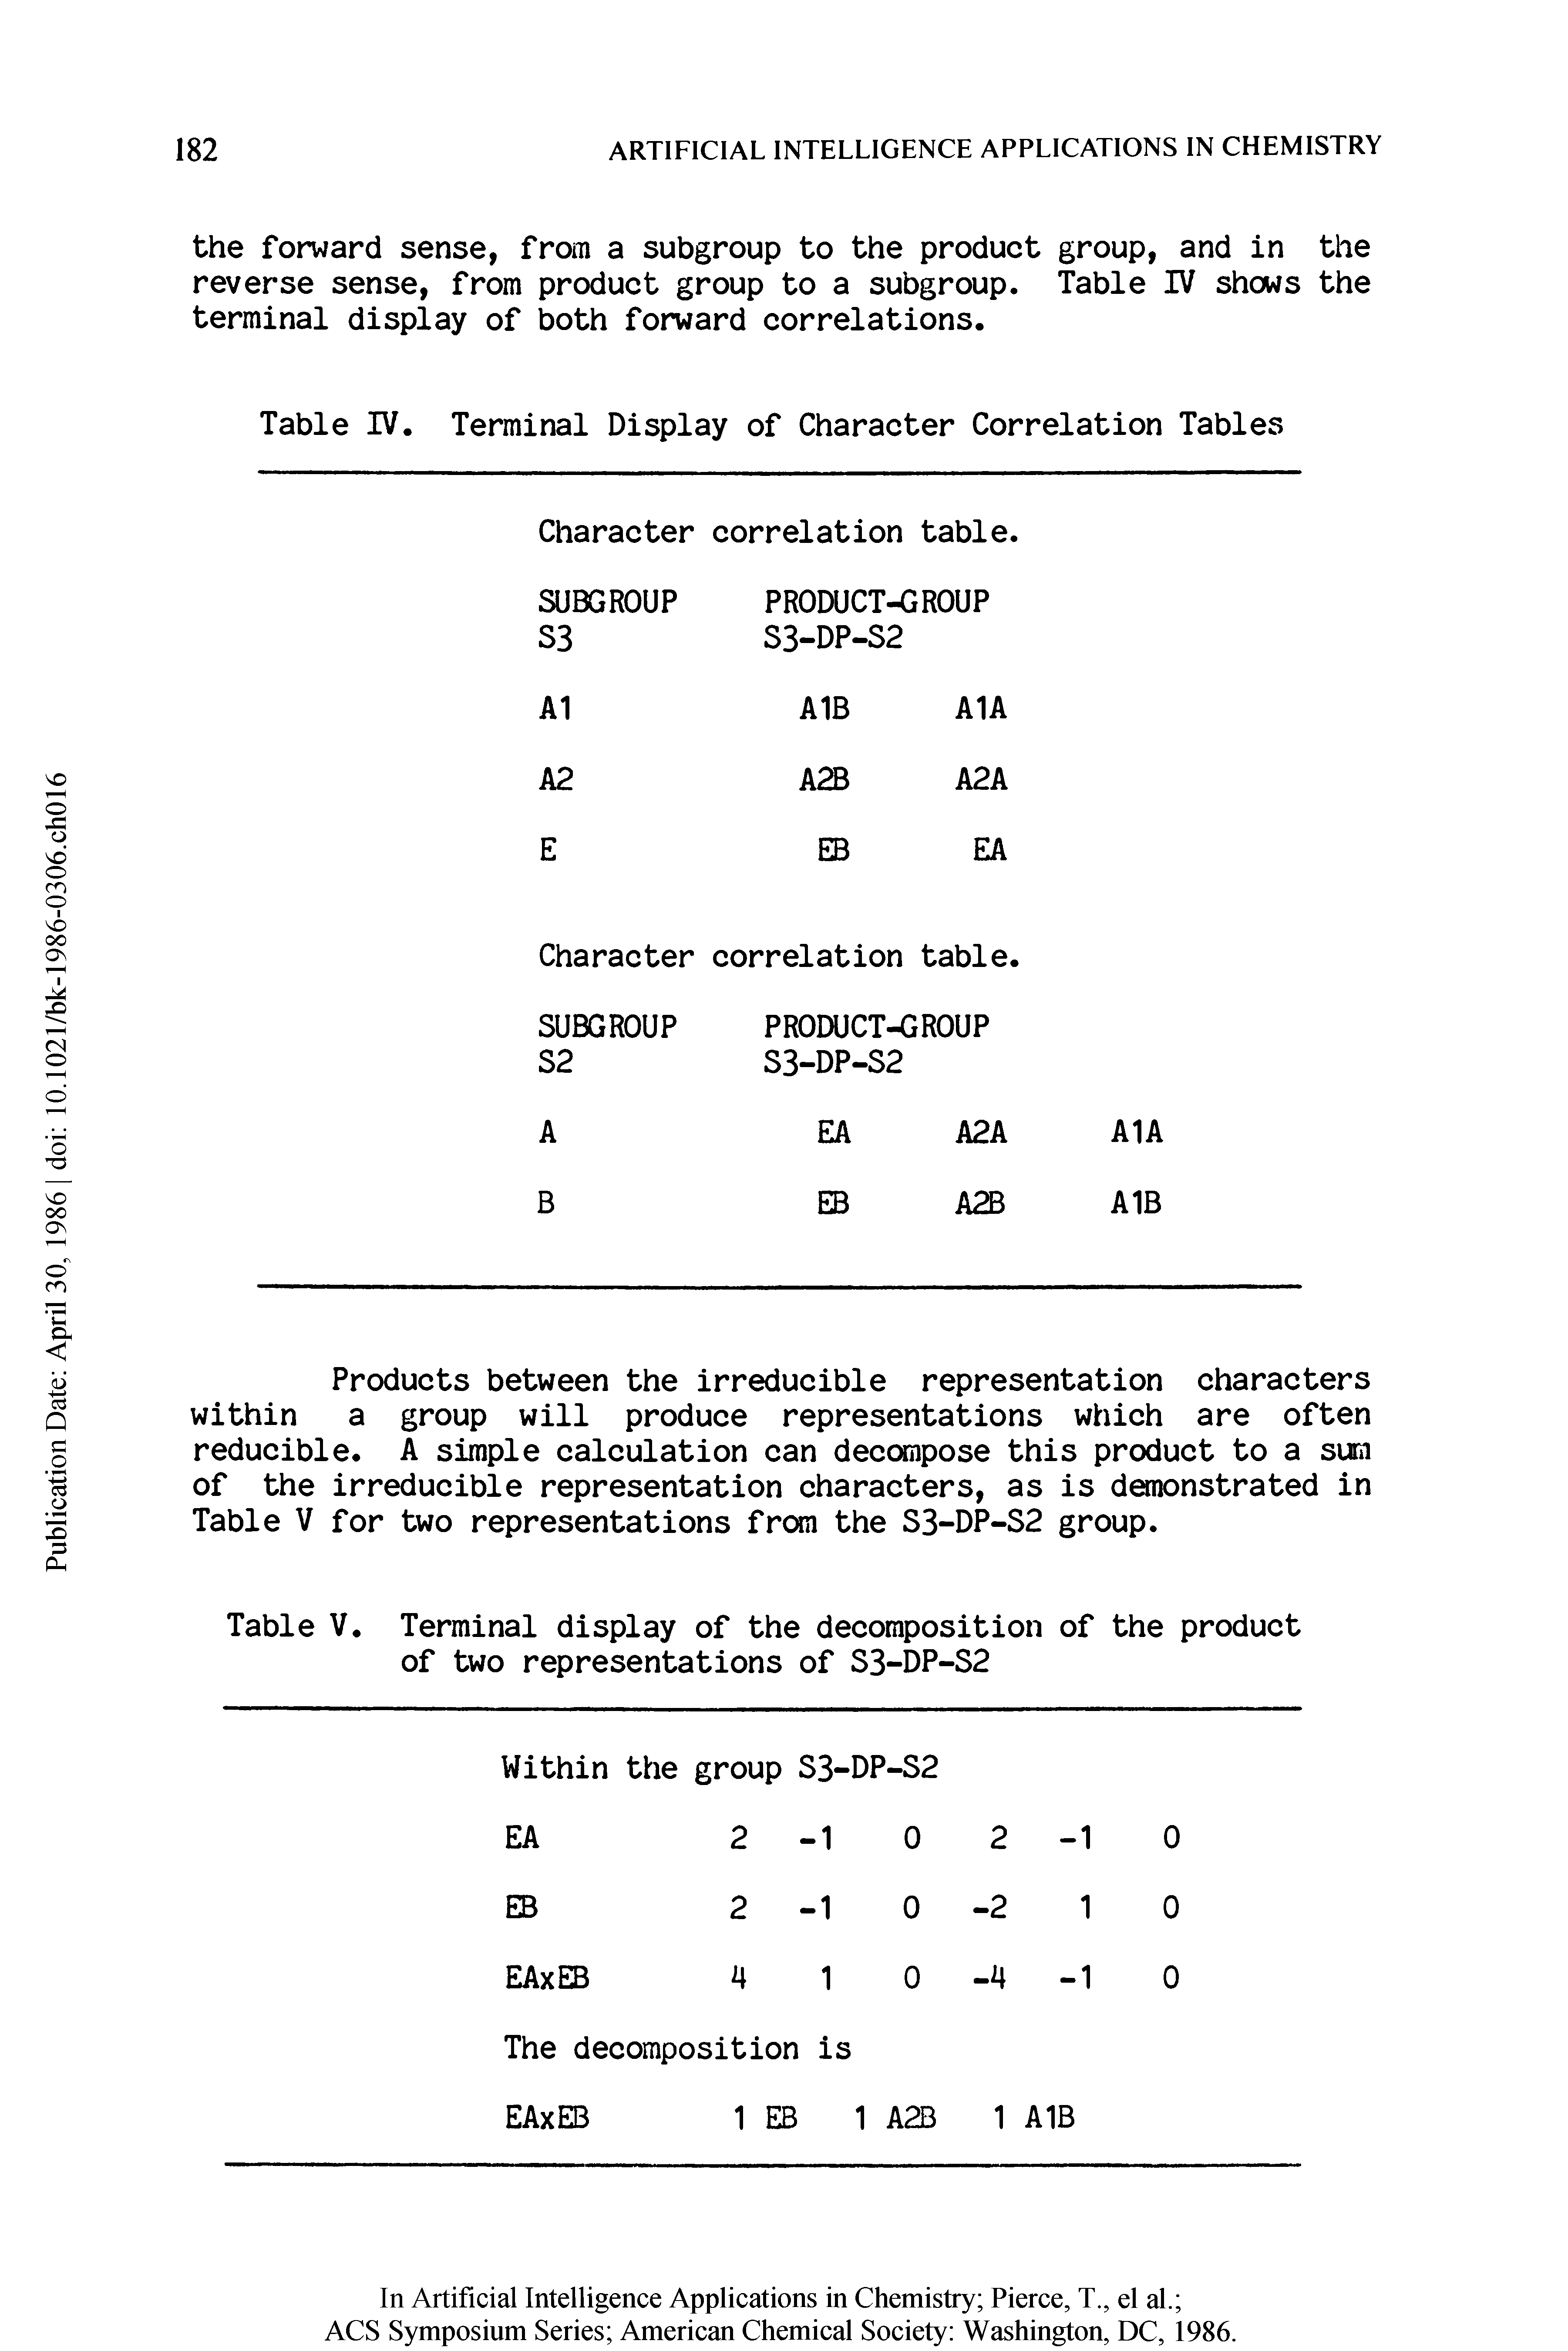 Table V. Terminal display of the decomposition of the product of two representations of S3-DP-S2...